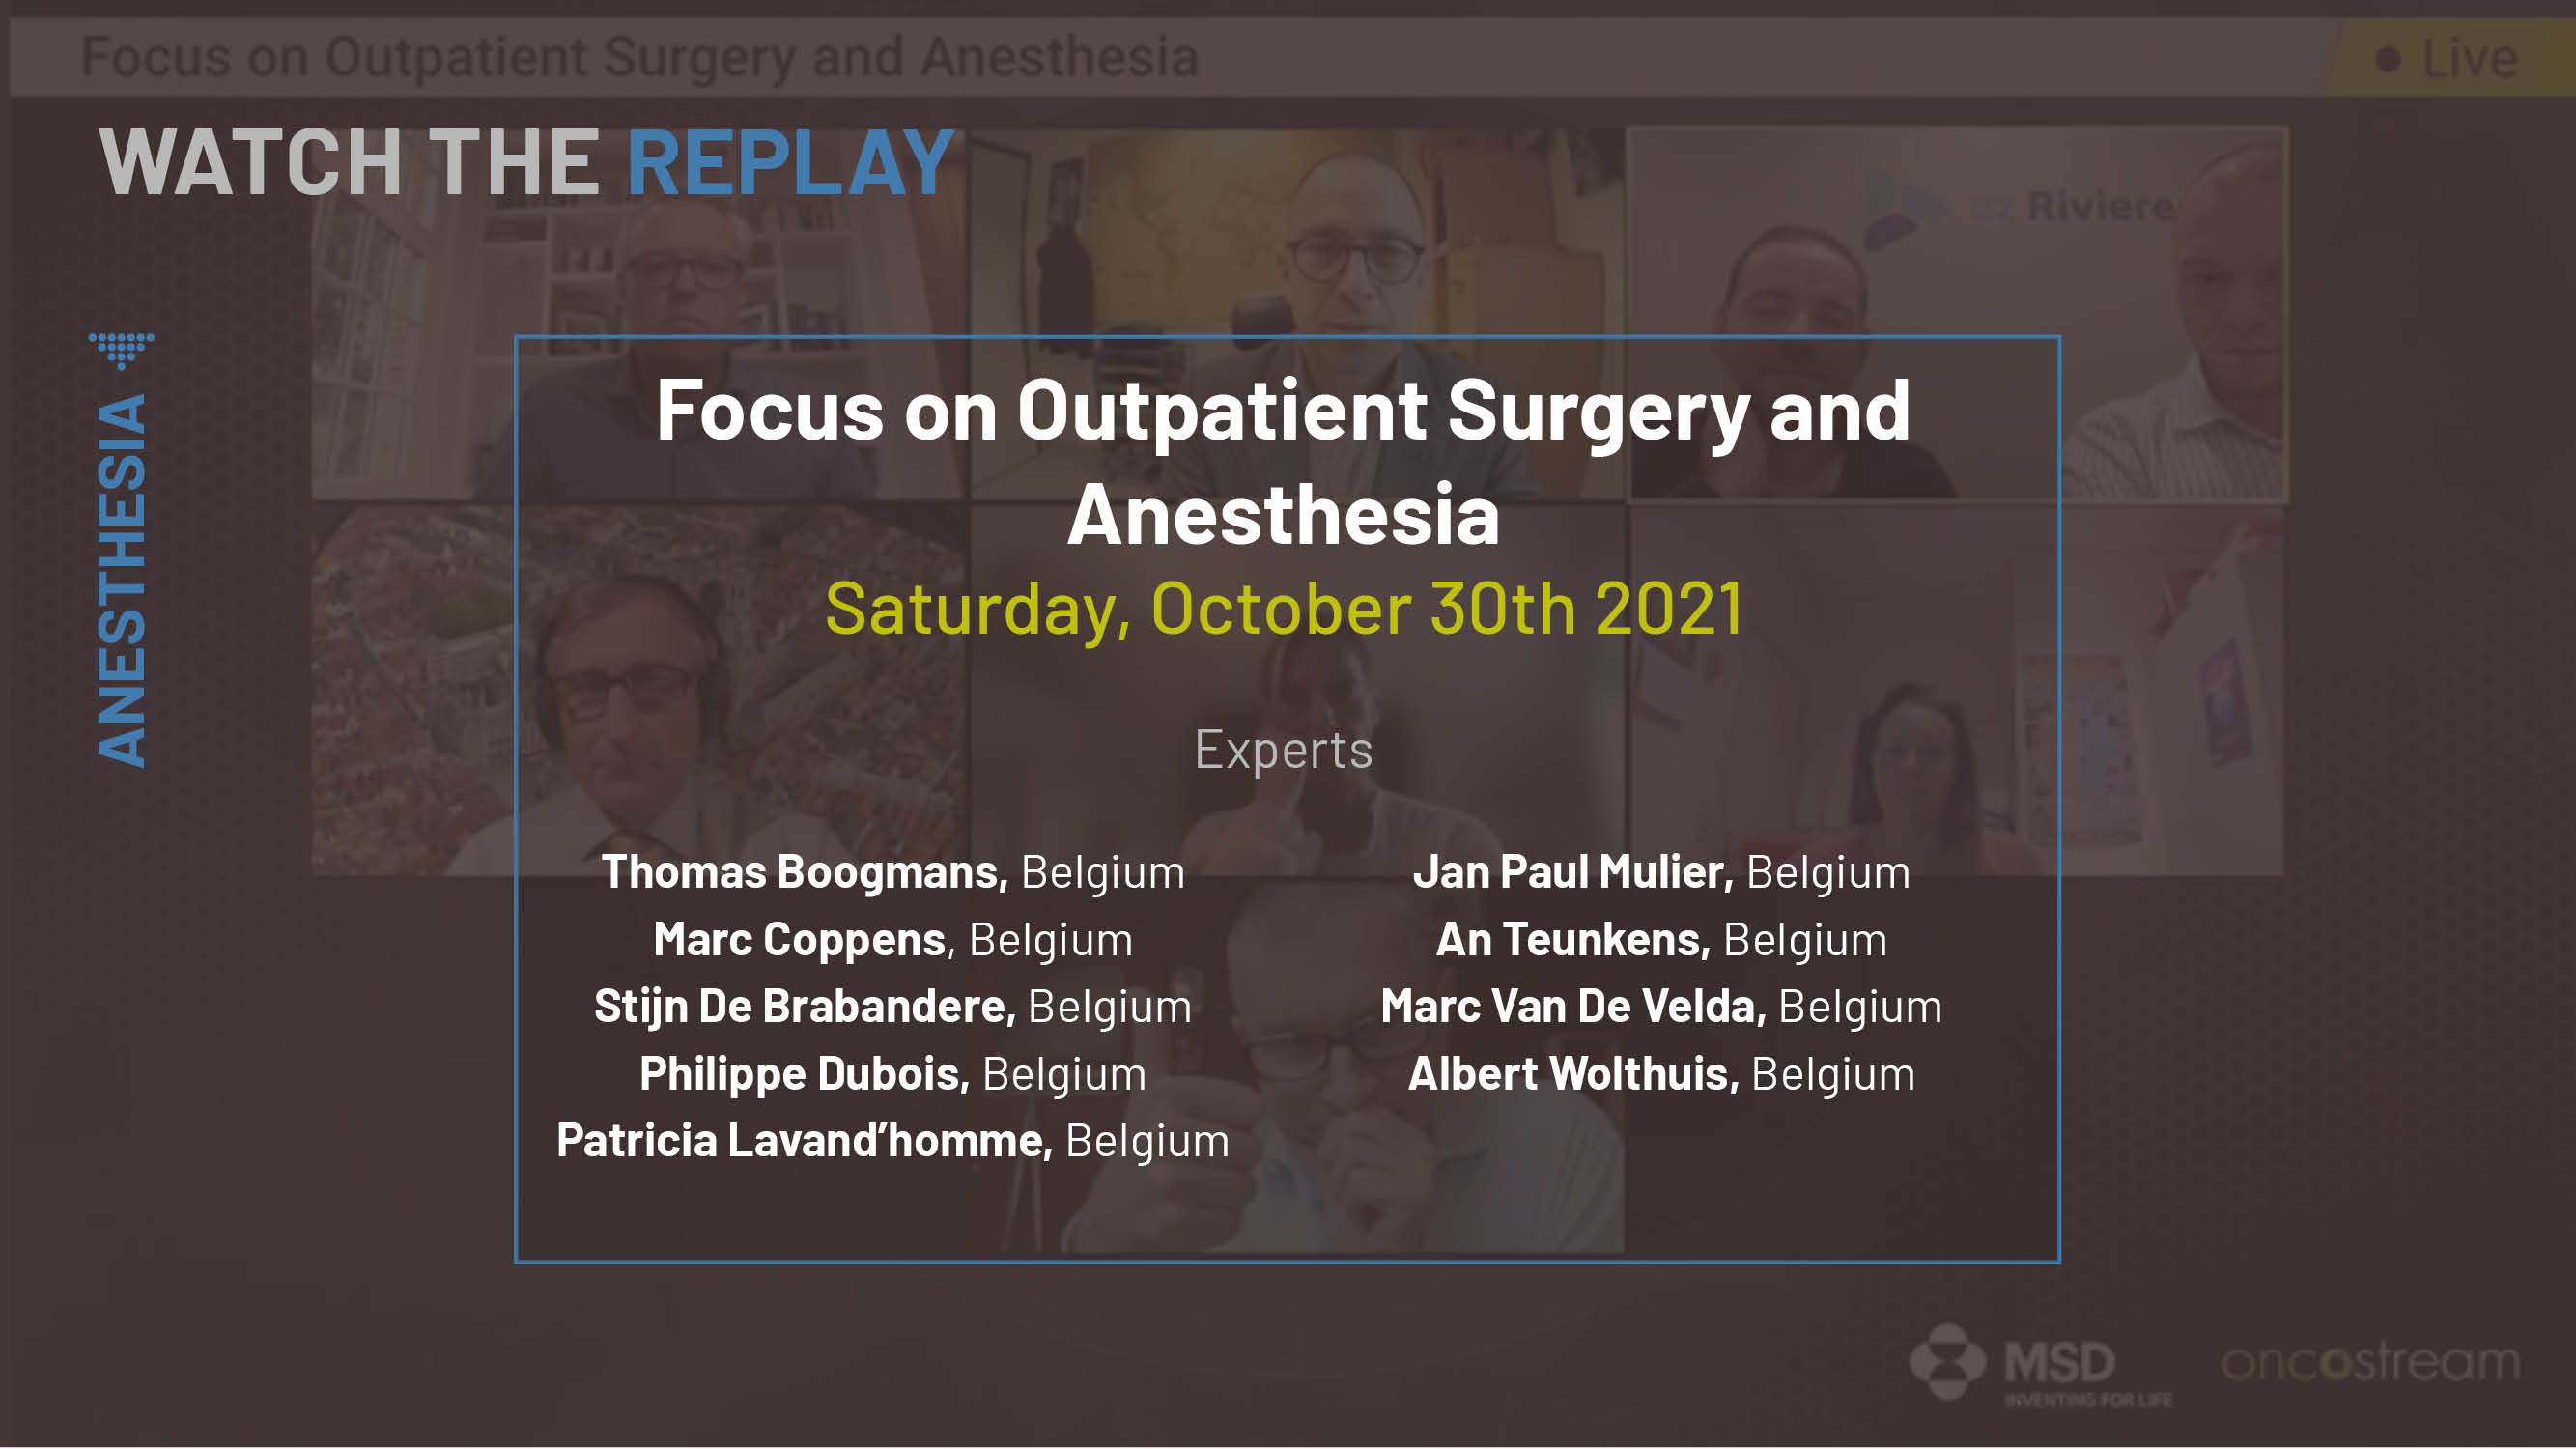 Focus on Outpatient Surgery and Anesthesia